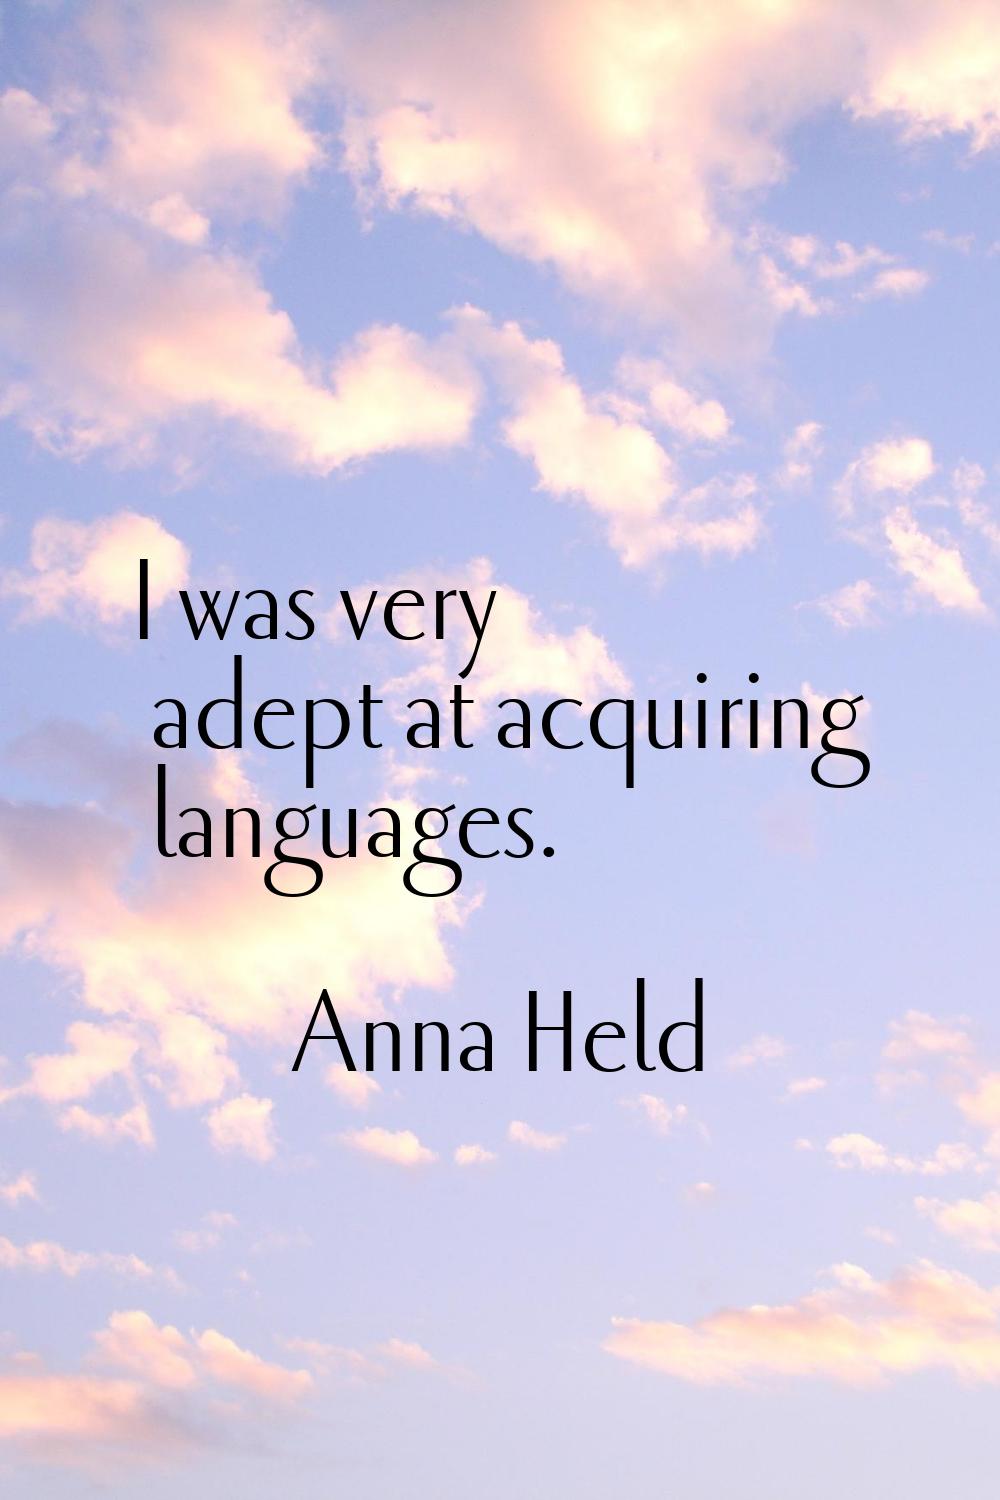 I was very adept at acquiring languages.